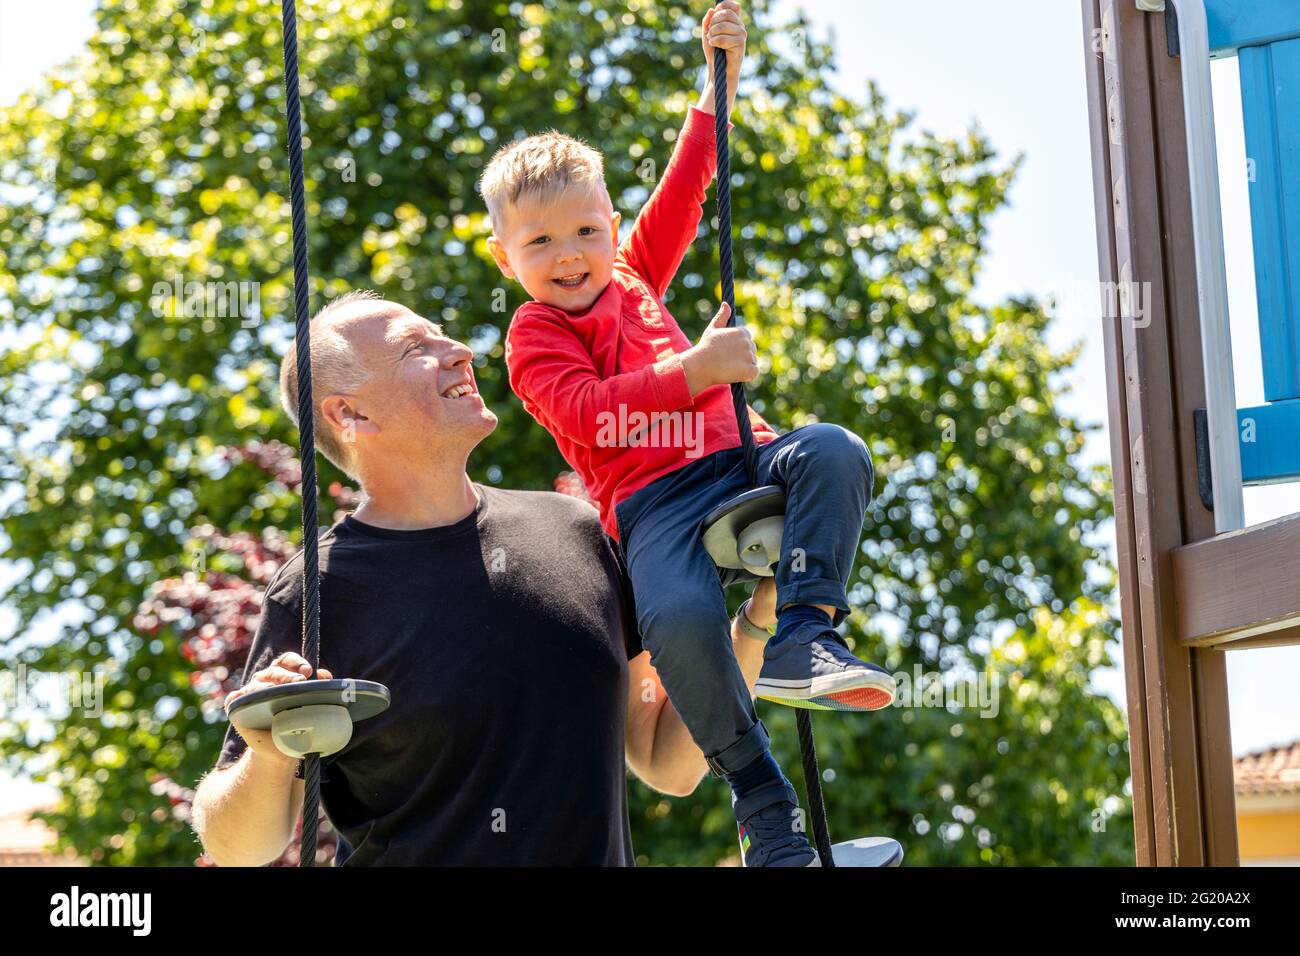 Father playing with his 3 years old son on the playground Stock Photo